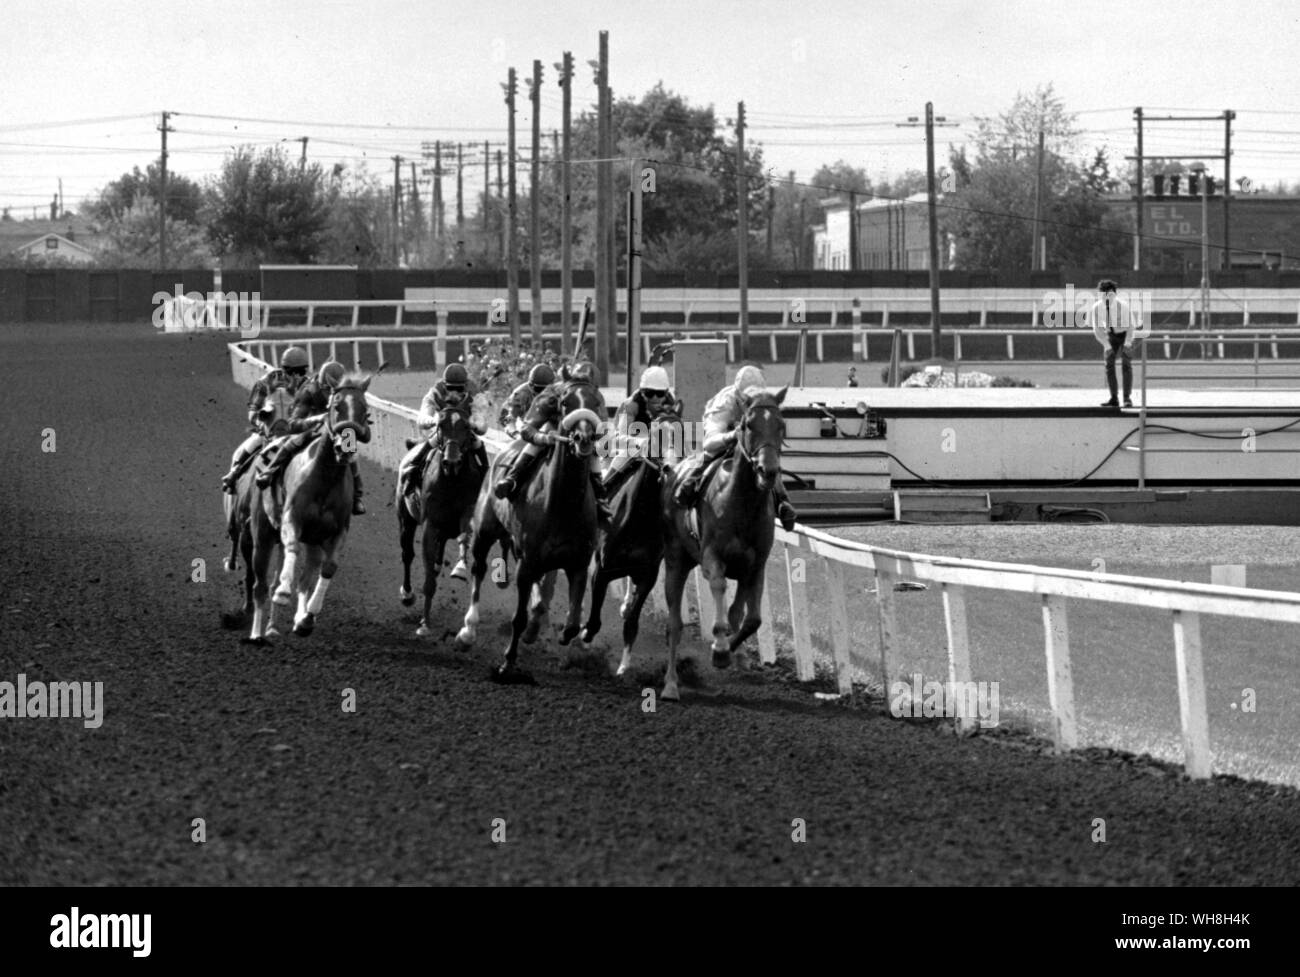 Racing at the Northland Race Track, Edmonton, Alberta, Canada. Encyclopedia of the Horse page 92..  . Stock Photo